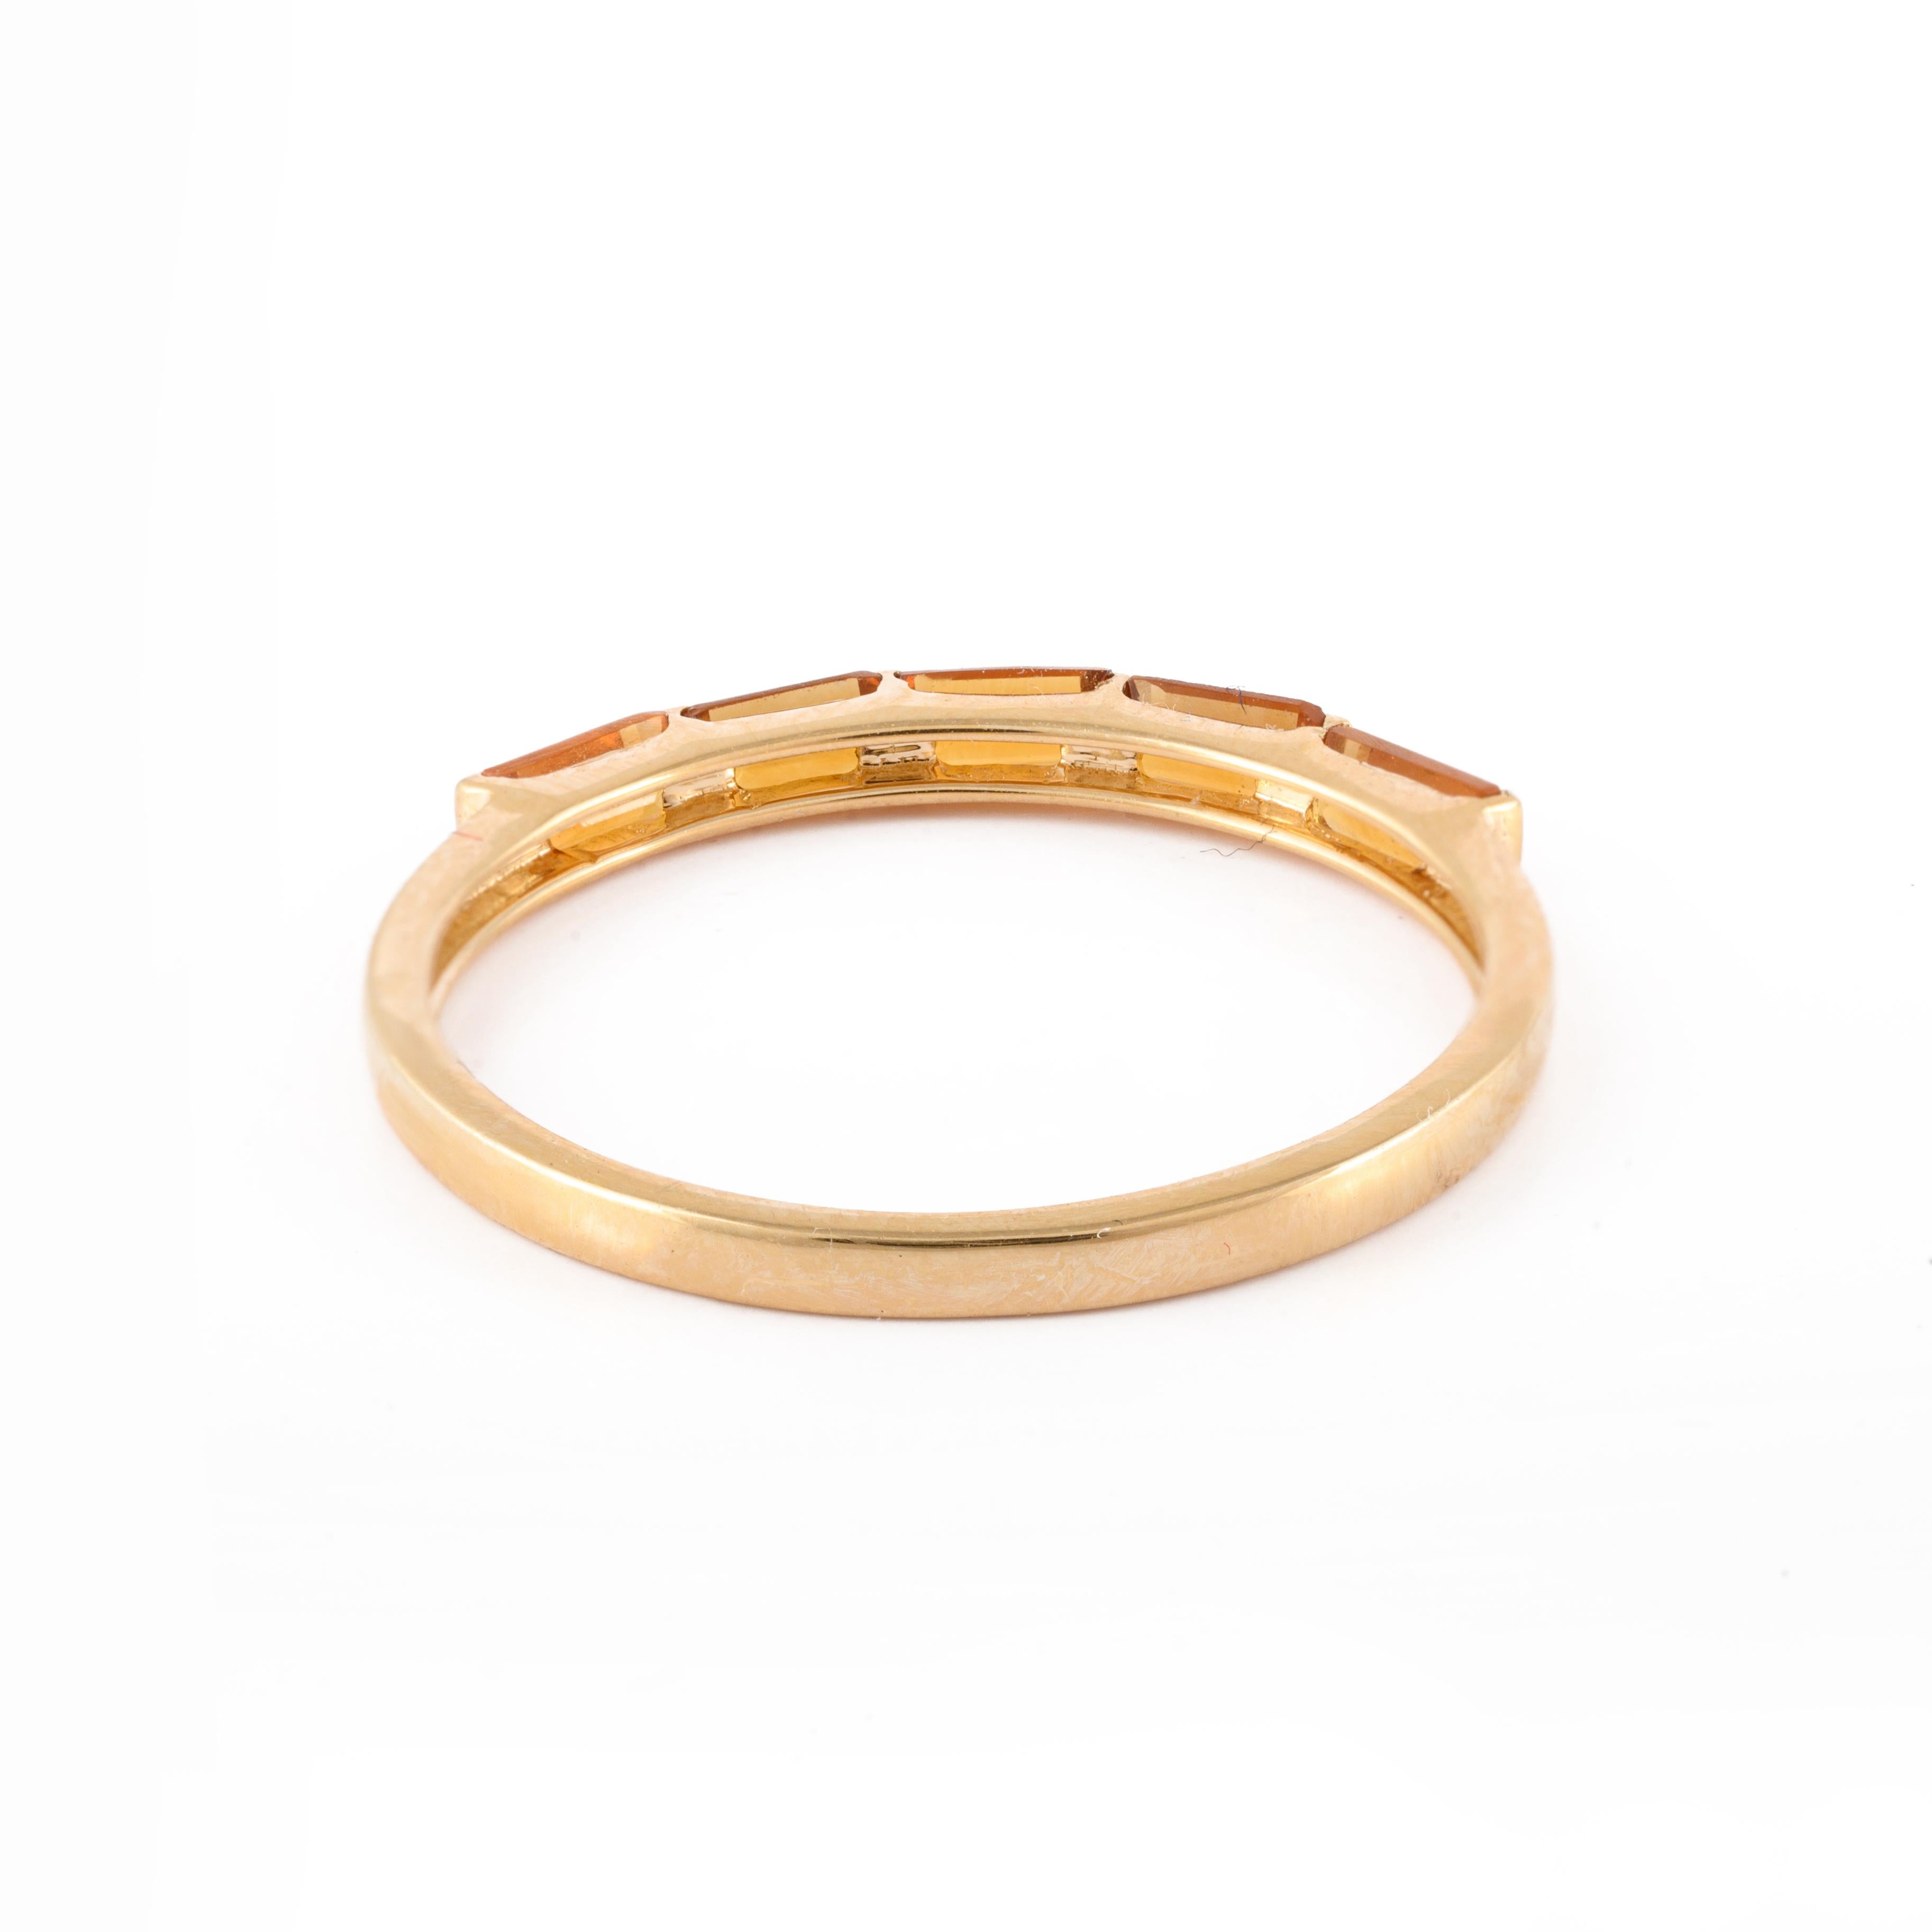 For Sale:  Stackable Citrine Half Eternity Band Ring in 18kt Solid Yellow Gold For Women 6